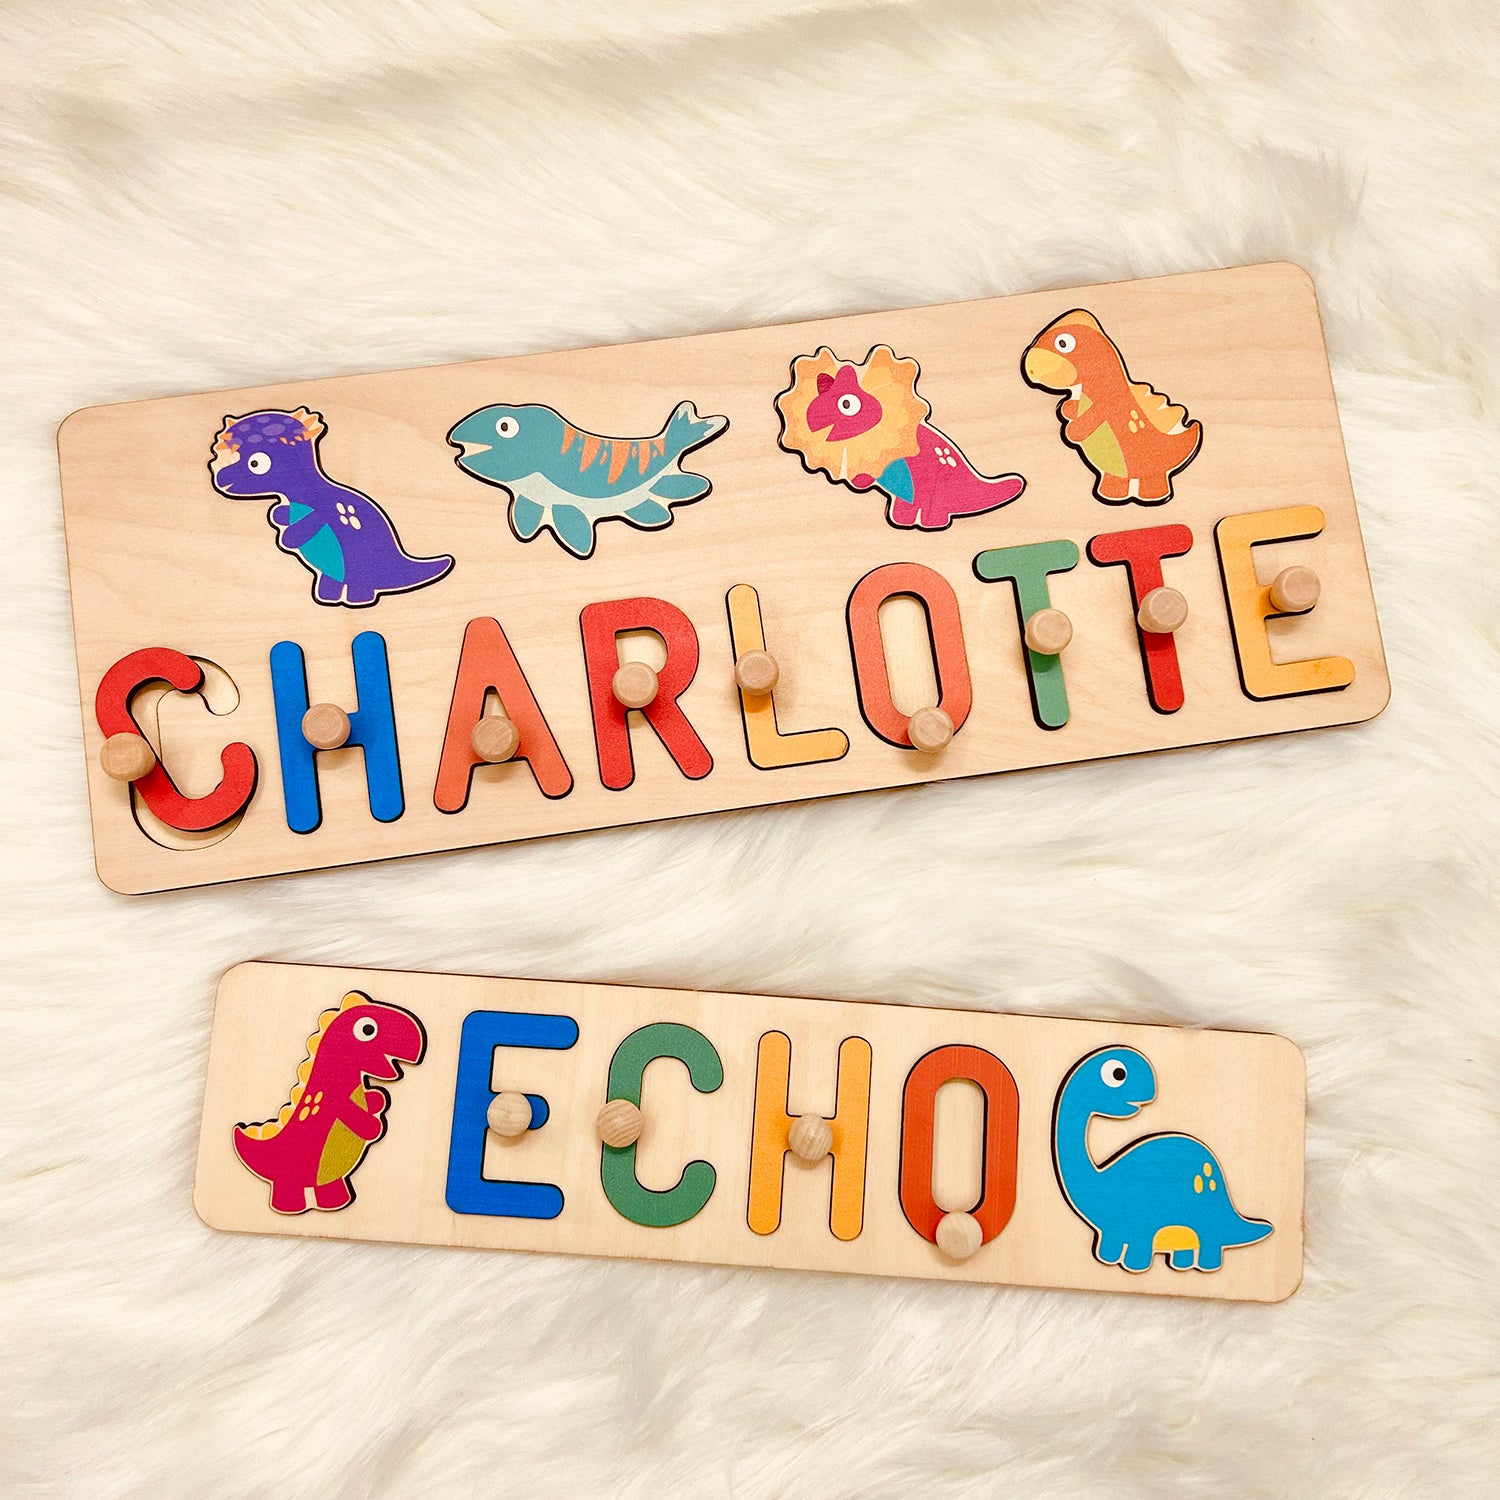 Personalized Wooden Baby Name Puzzle - Dinosaurs Product Name: Personalized Wooden Name Puzzle - DinosaursMaterial: Eco-Friendly Plywood BasswoodLetters Available: Up to 8Engraving Messages: AvailableNon-Toxic: YesNon-Harmful: Yes Our bestselling Name Puz